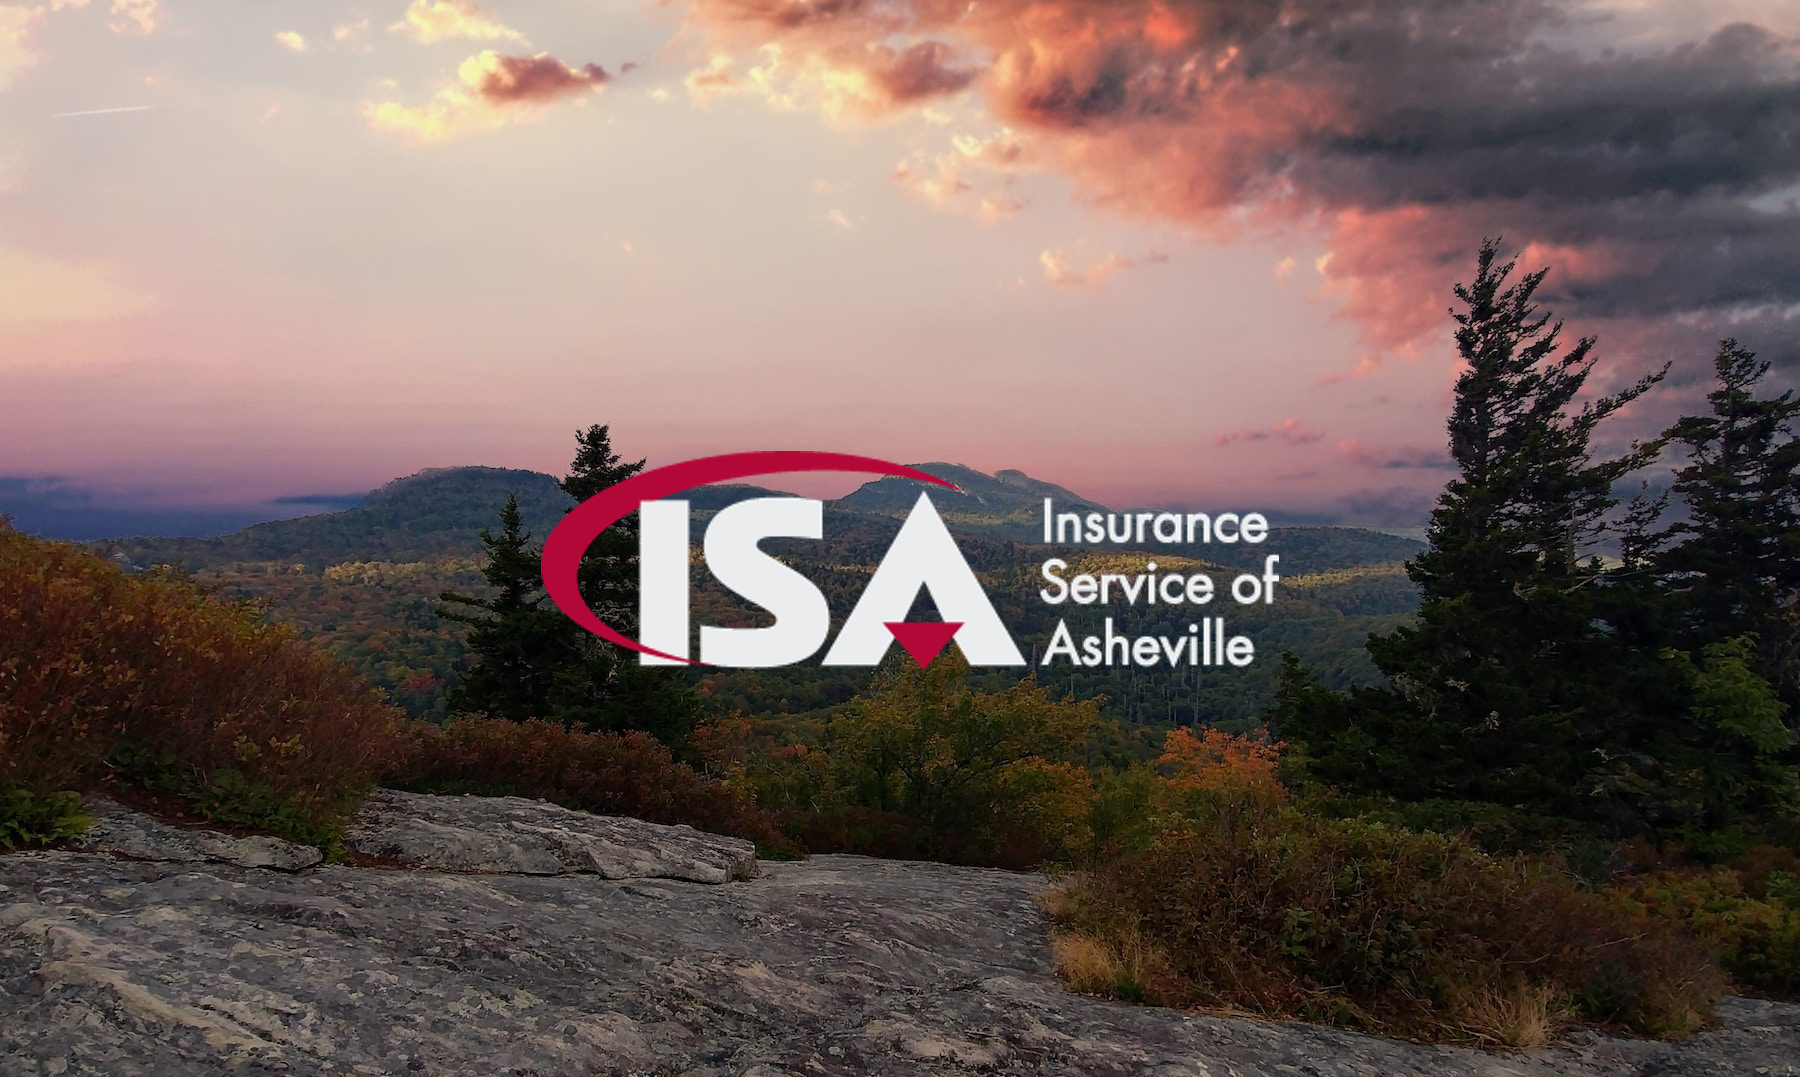 Insurance Agency in Asheville, NC  Personal, Business & Employee Benefits  Insurance